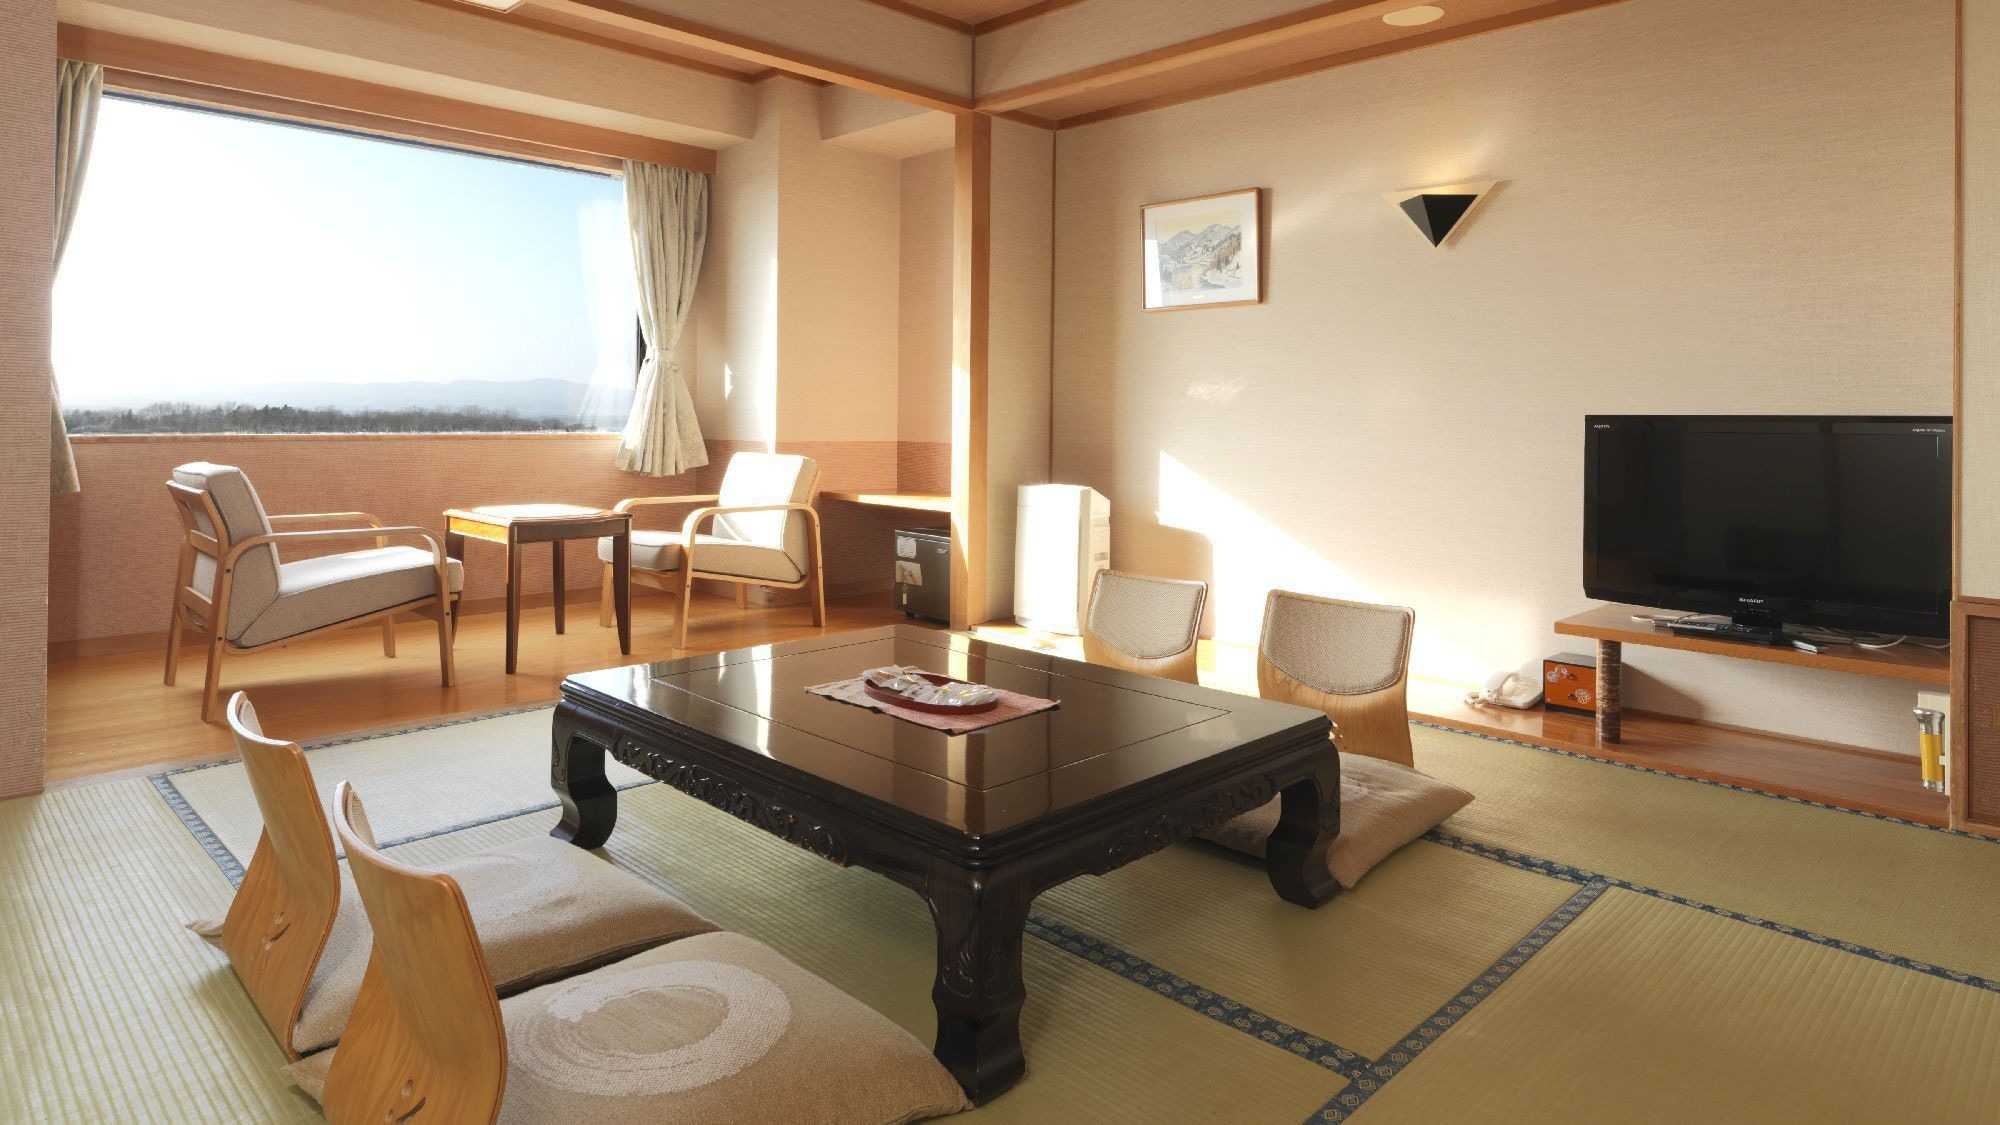 ◆ [Tower Building] Japanese-style room 10 tatami mats (example) / If you are traveling to a hot spring, it is good to relax in the Japanese-style room.